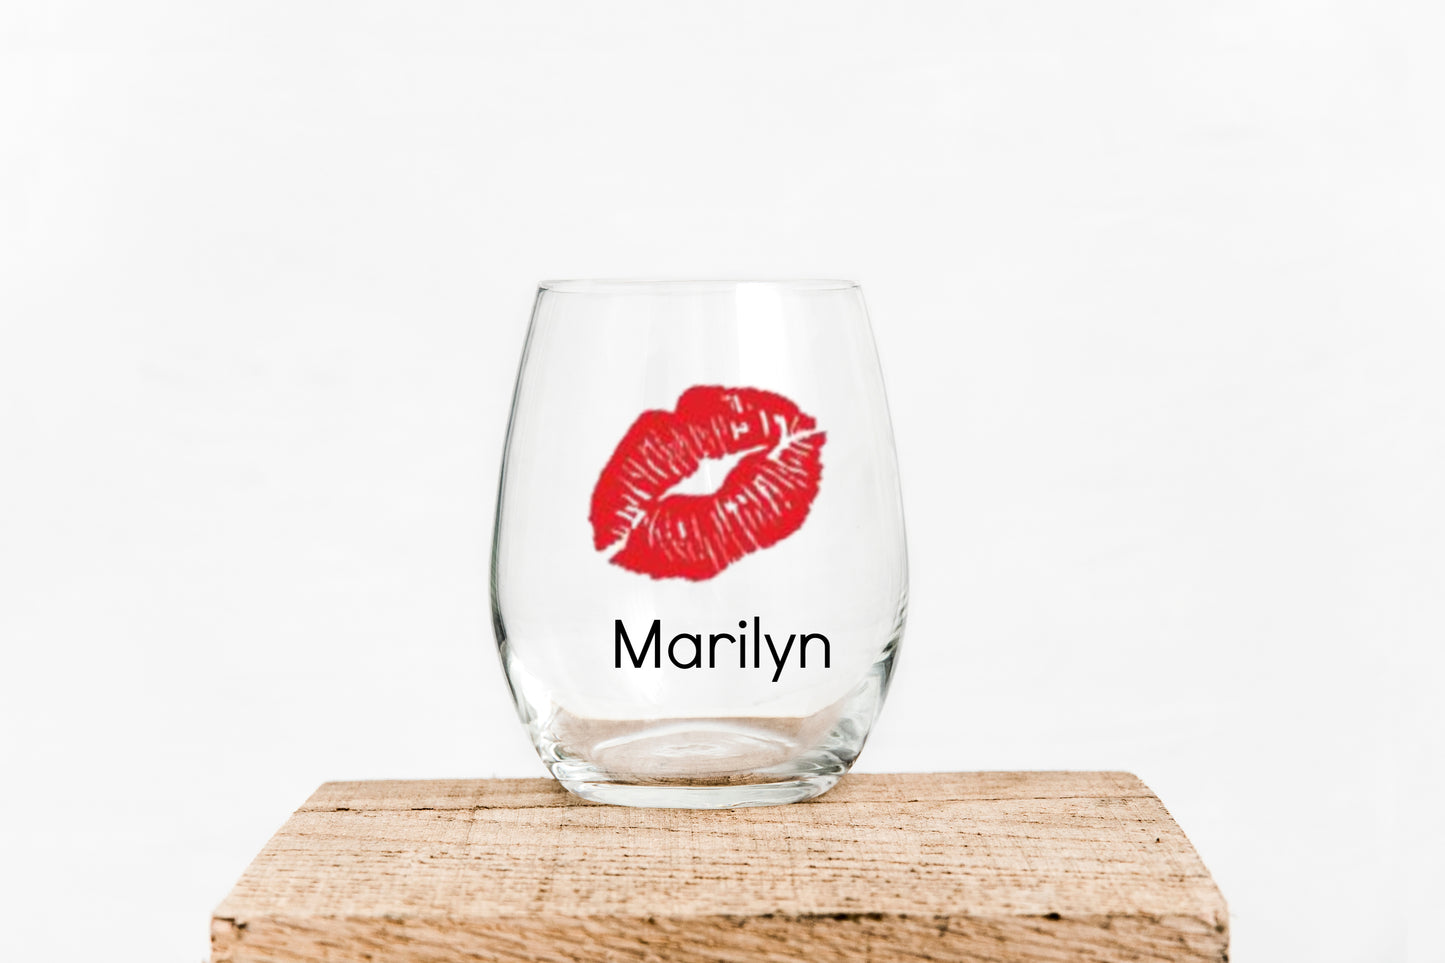 15oz Wine glass withlips in red writing  has Marilyn in blackGrit City Rebel